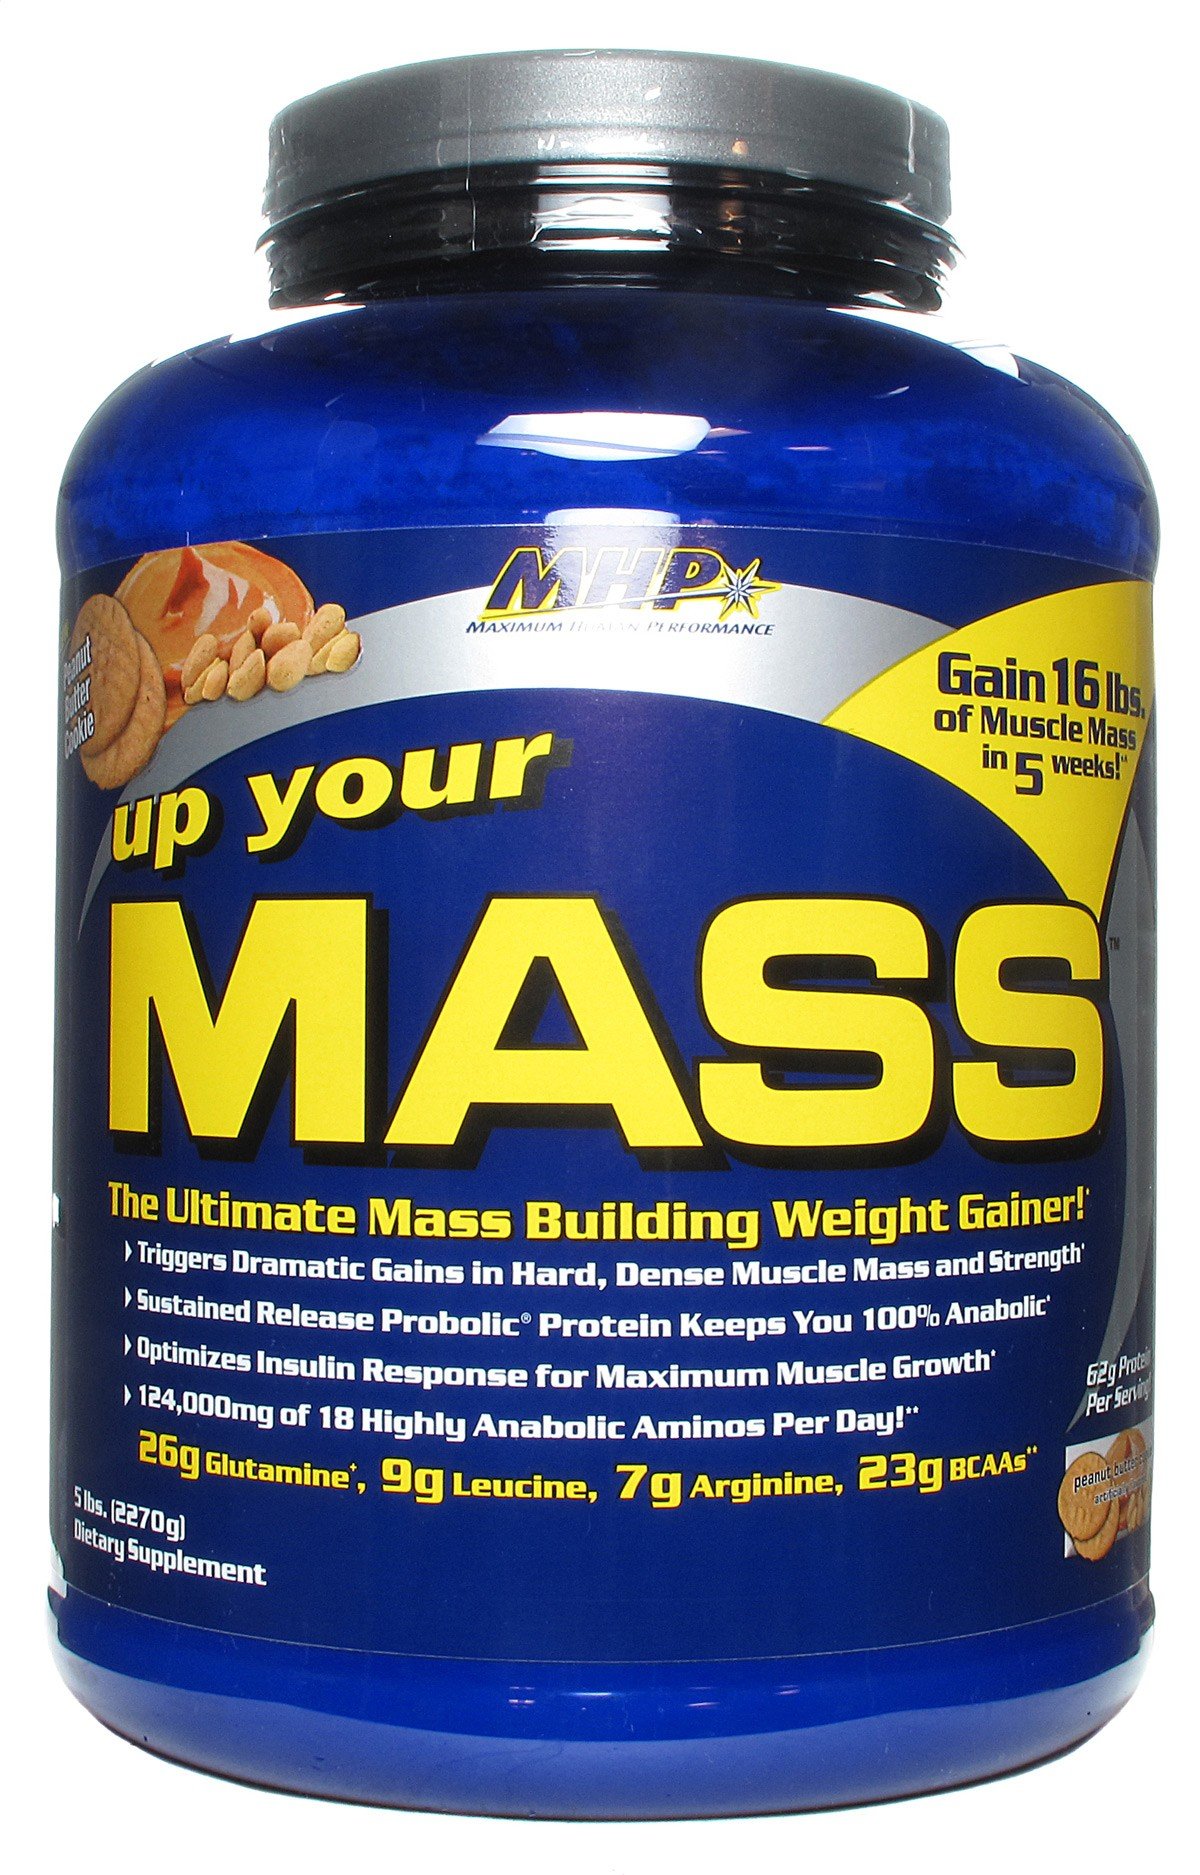 Up Your Mass, 2270 g, MHP. Gainer. Mass Gain Energy & Endurance recovery 